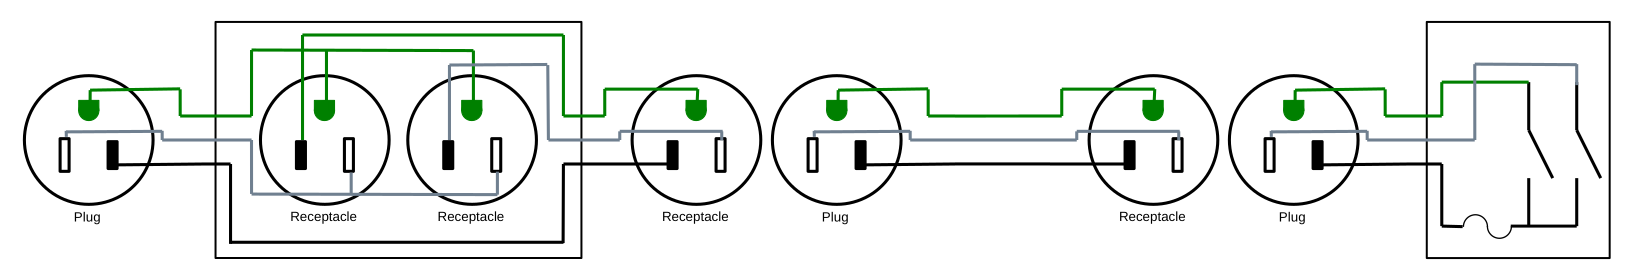 wiring-diagram-double-switch-extensible.png